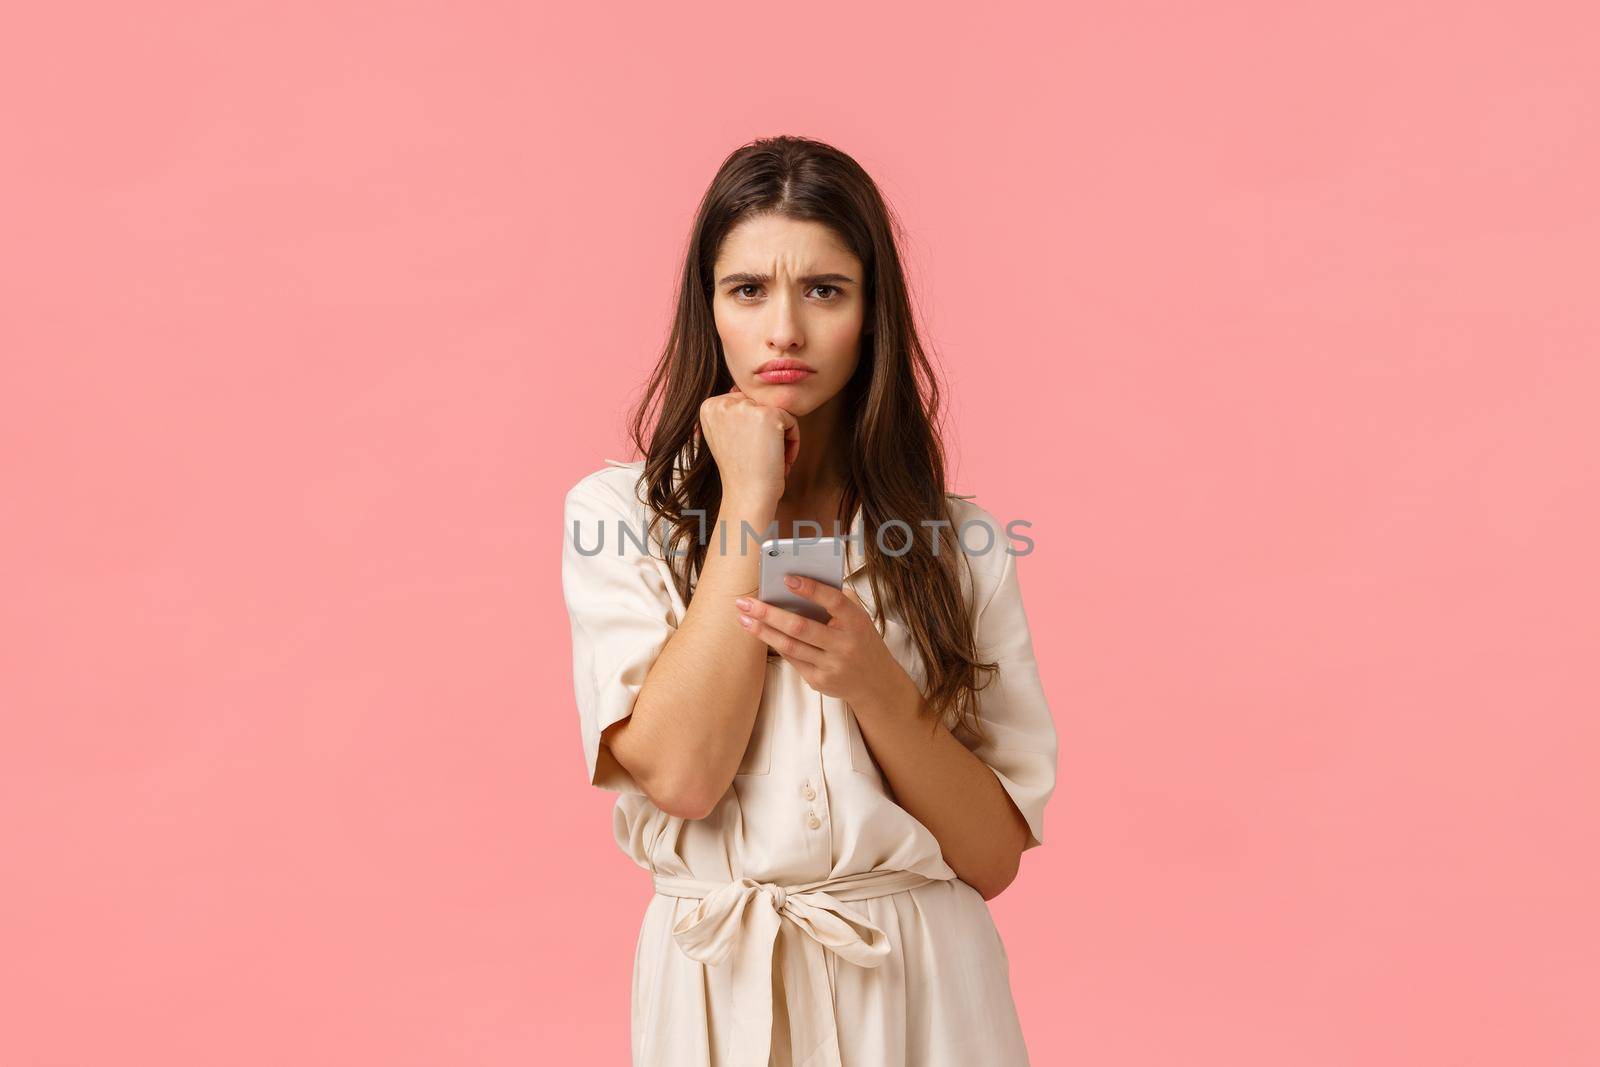 Sulky cute girlfriend facing complicated decision, frowning and sulking leaning on fist, holding smartphone, read strange message cant understand, feel perplexed, standing pink background.